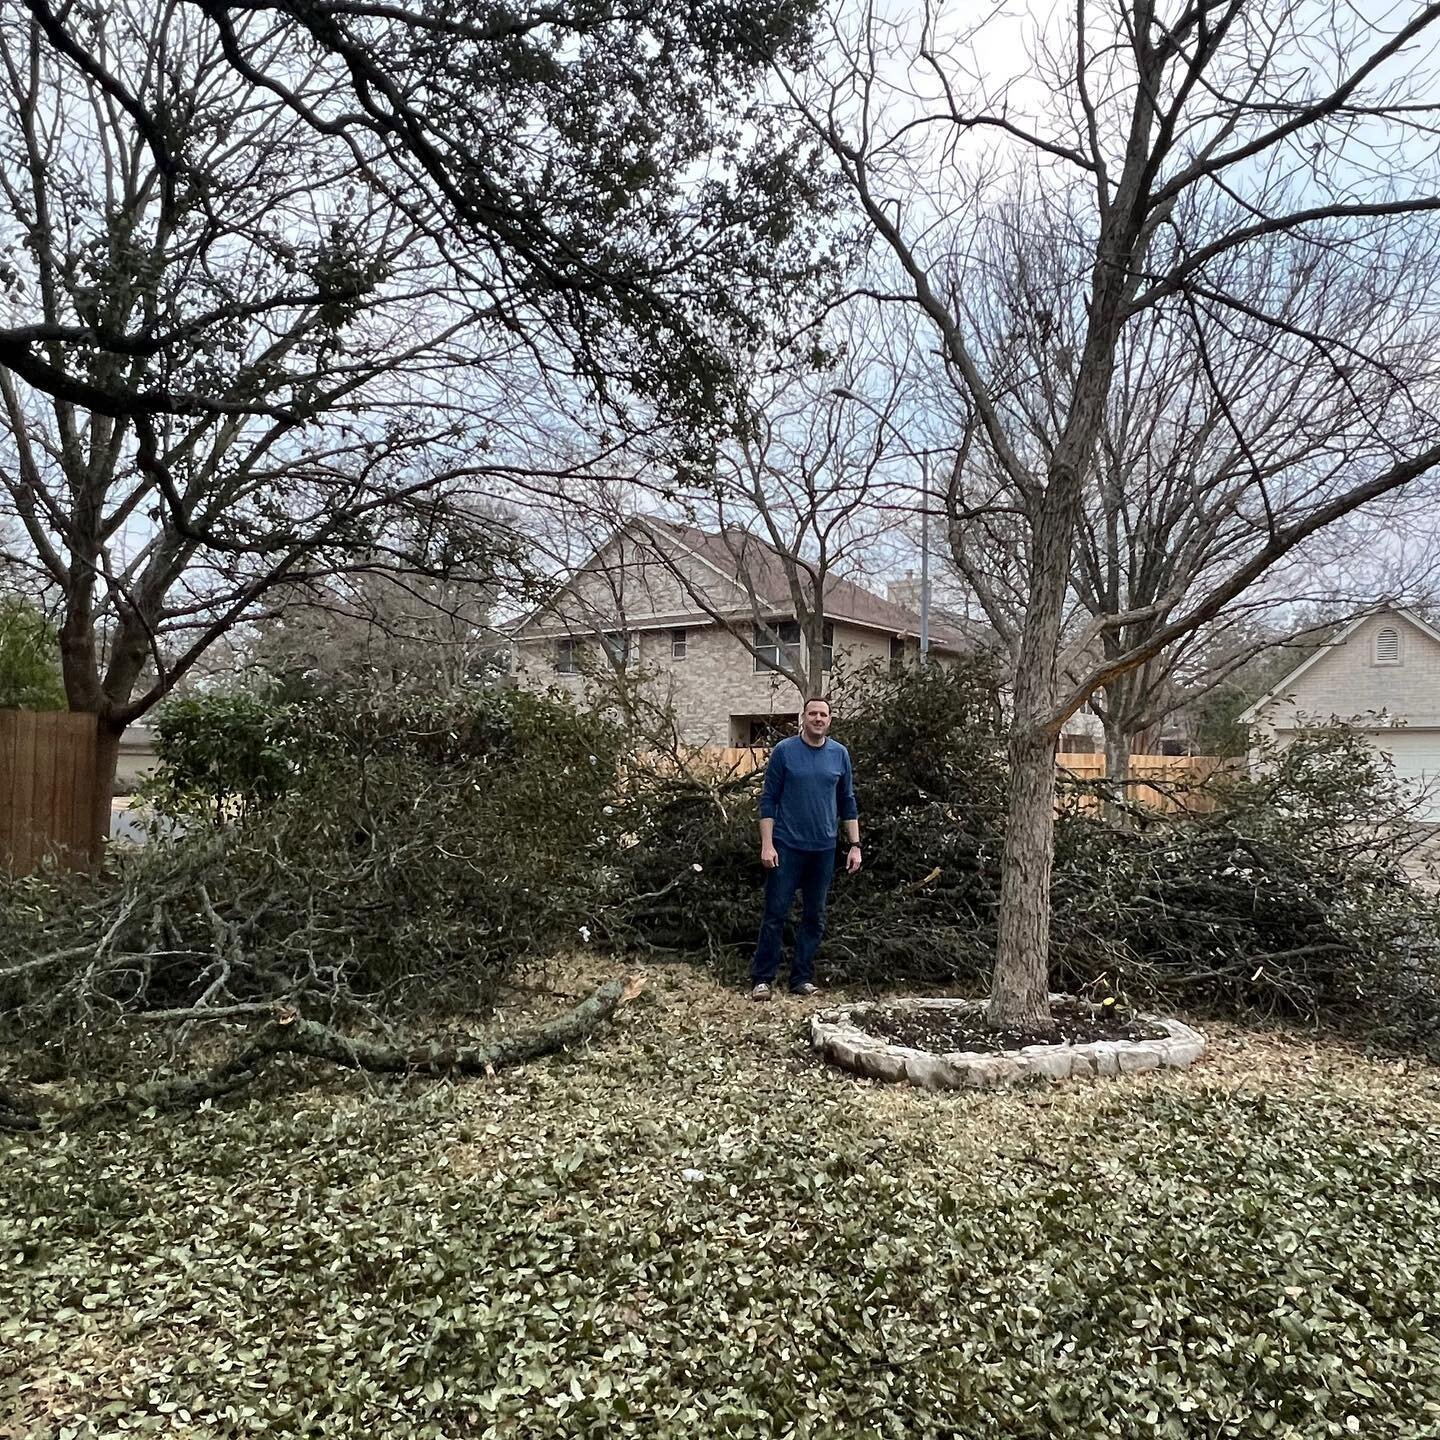 Pictures just don&rsquo;t seem to do it justice, but posting for posterity. The pile of fallen branches from #arborgeddon was taller than I am.  #nofilter #austintexas #austintx